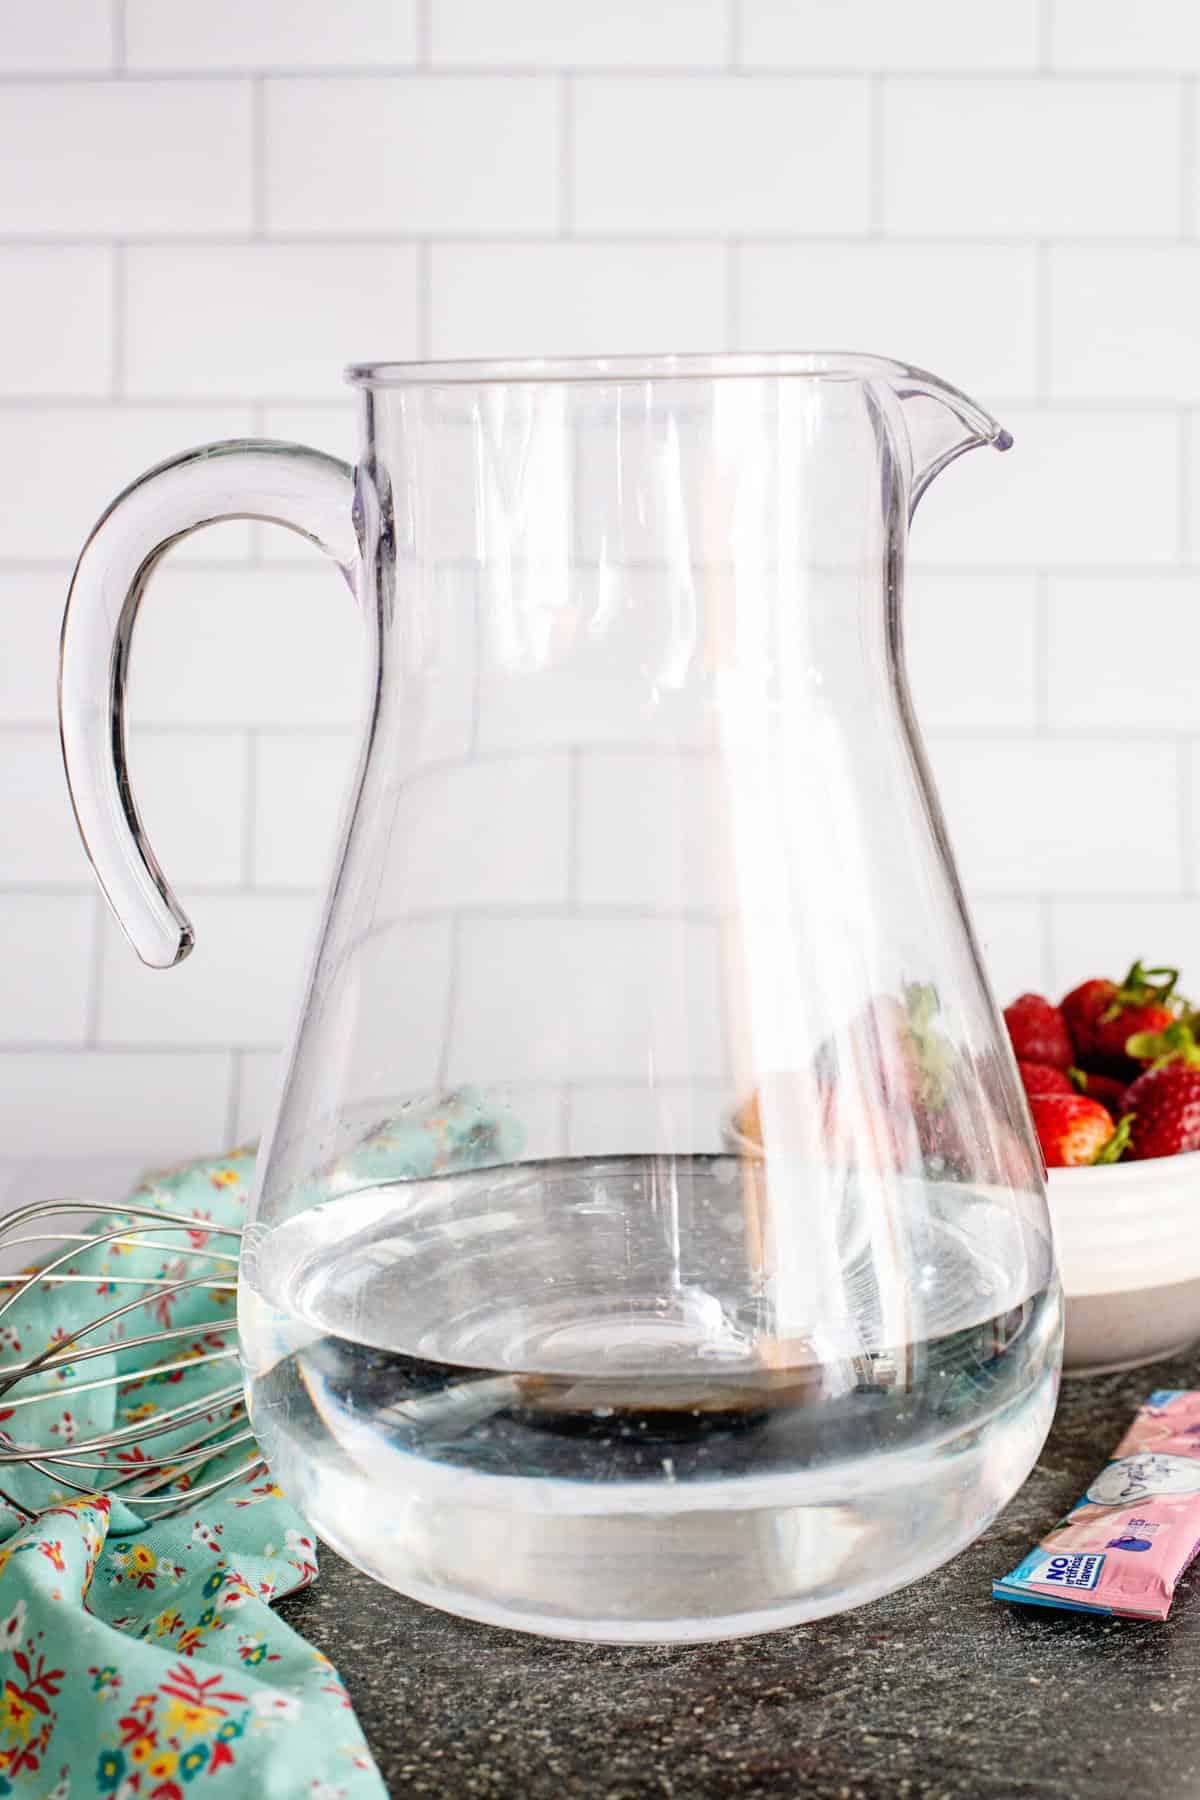 put water into the pitcher